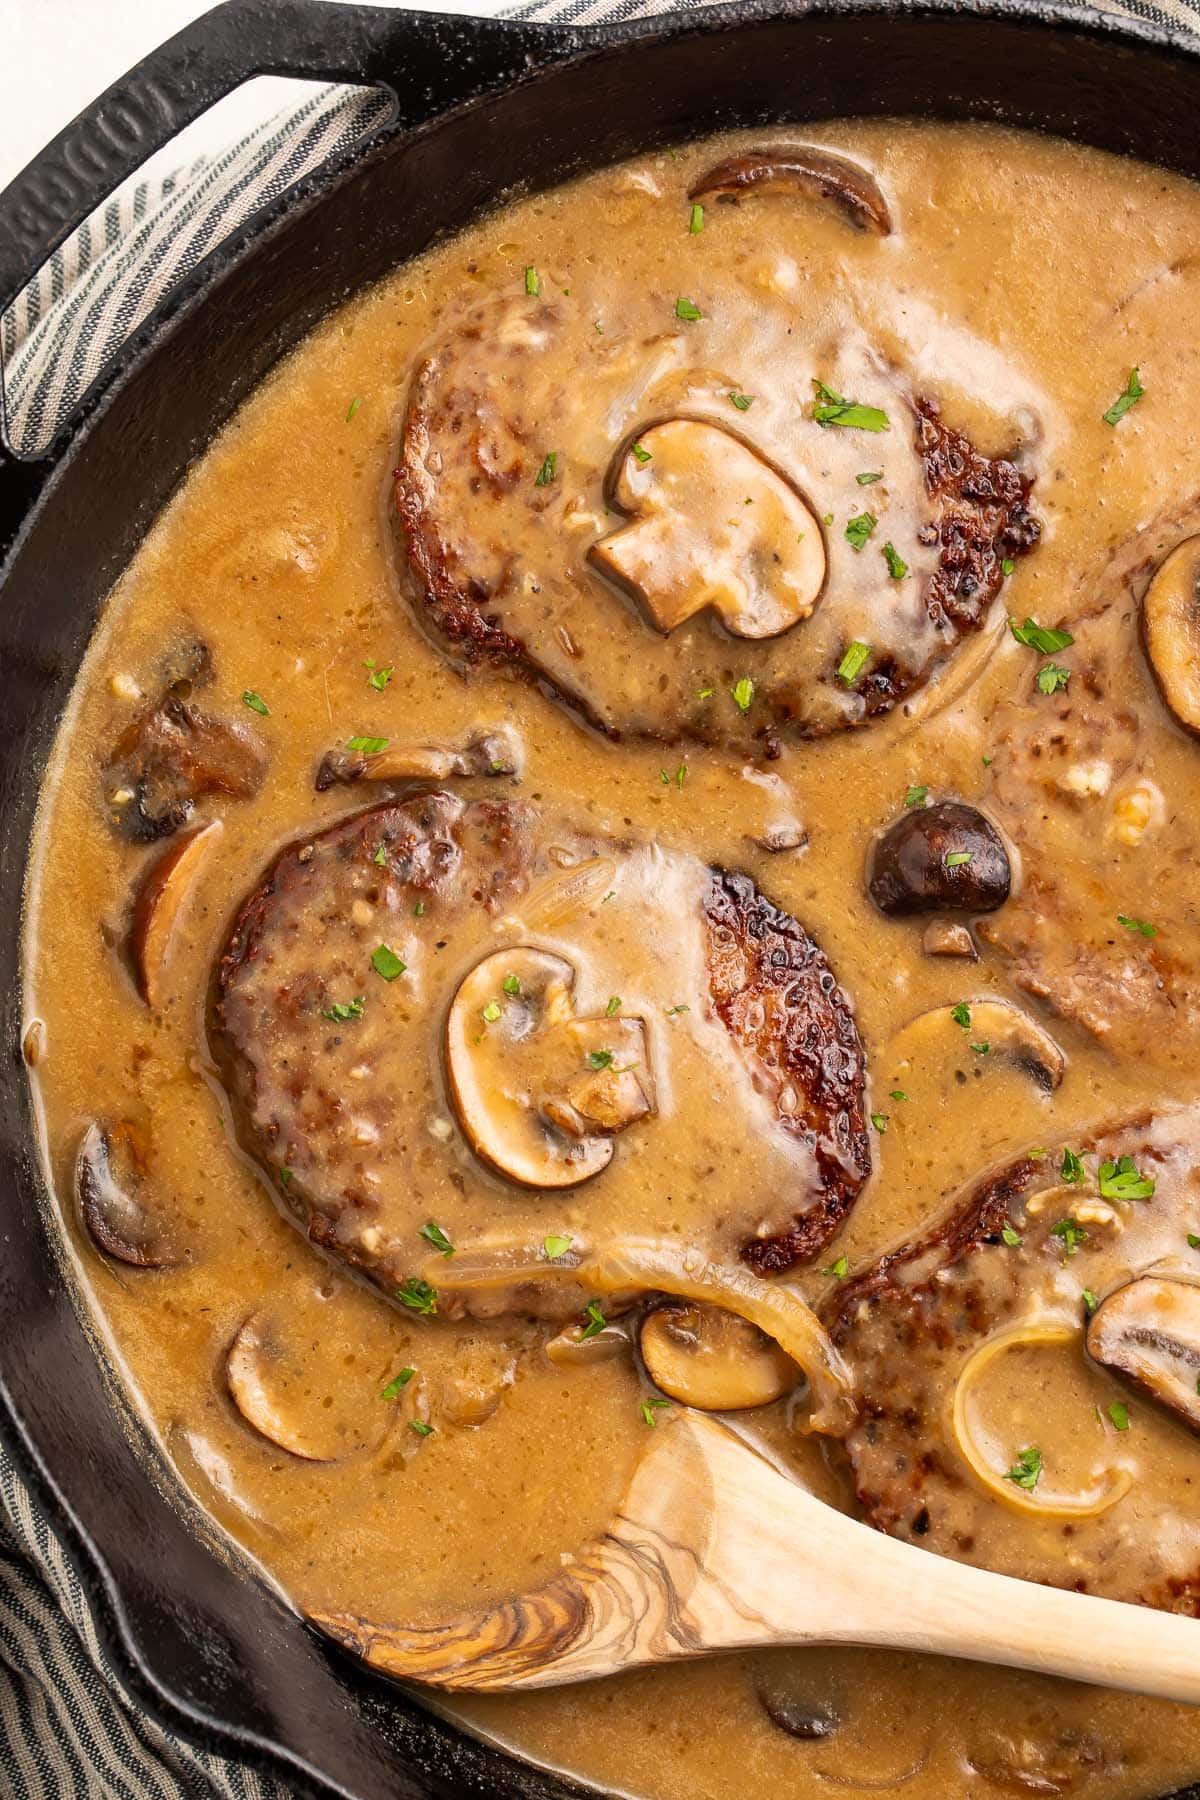 Four Whole30 salisbury steaks in a cast-iron skillet with plenty of salisbury sauce, mushrooms, and a wooden spoon.